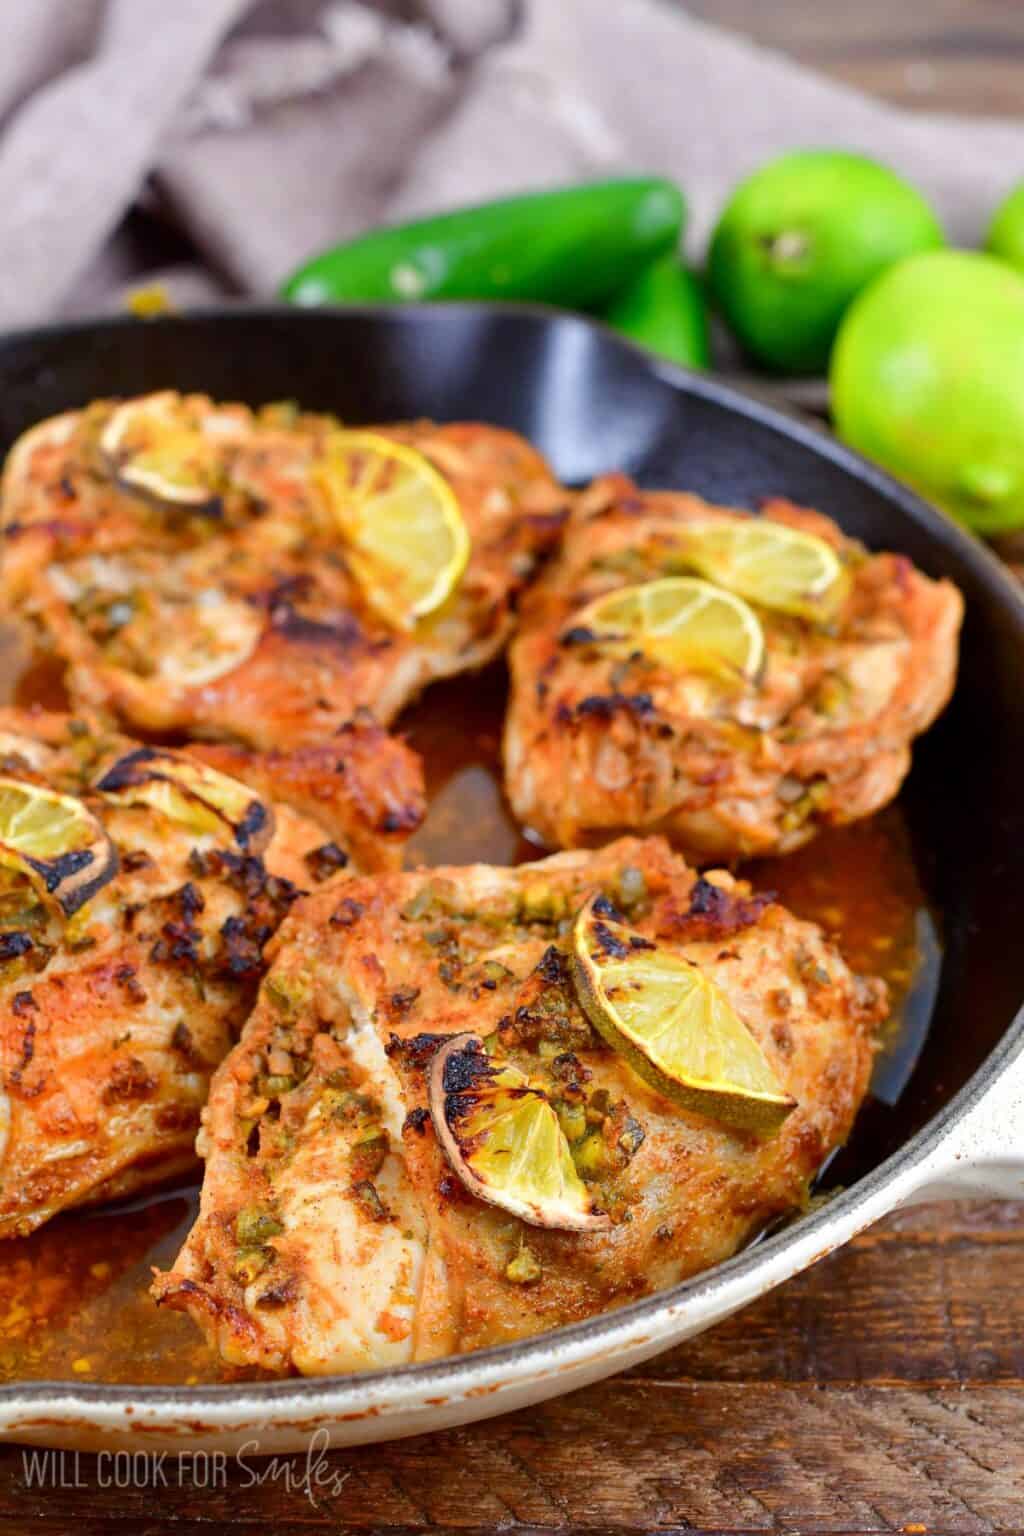 Chili Lime Chicken - Will Cook For Smiles